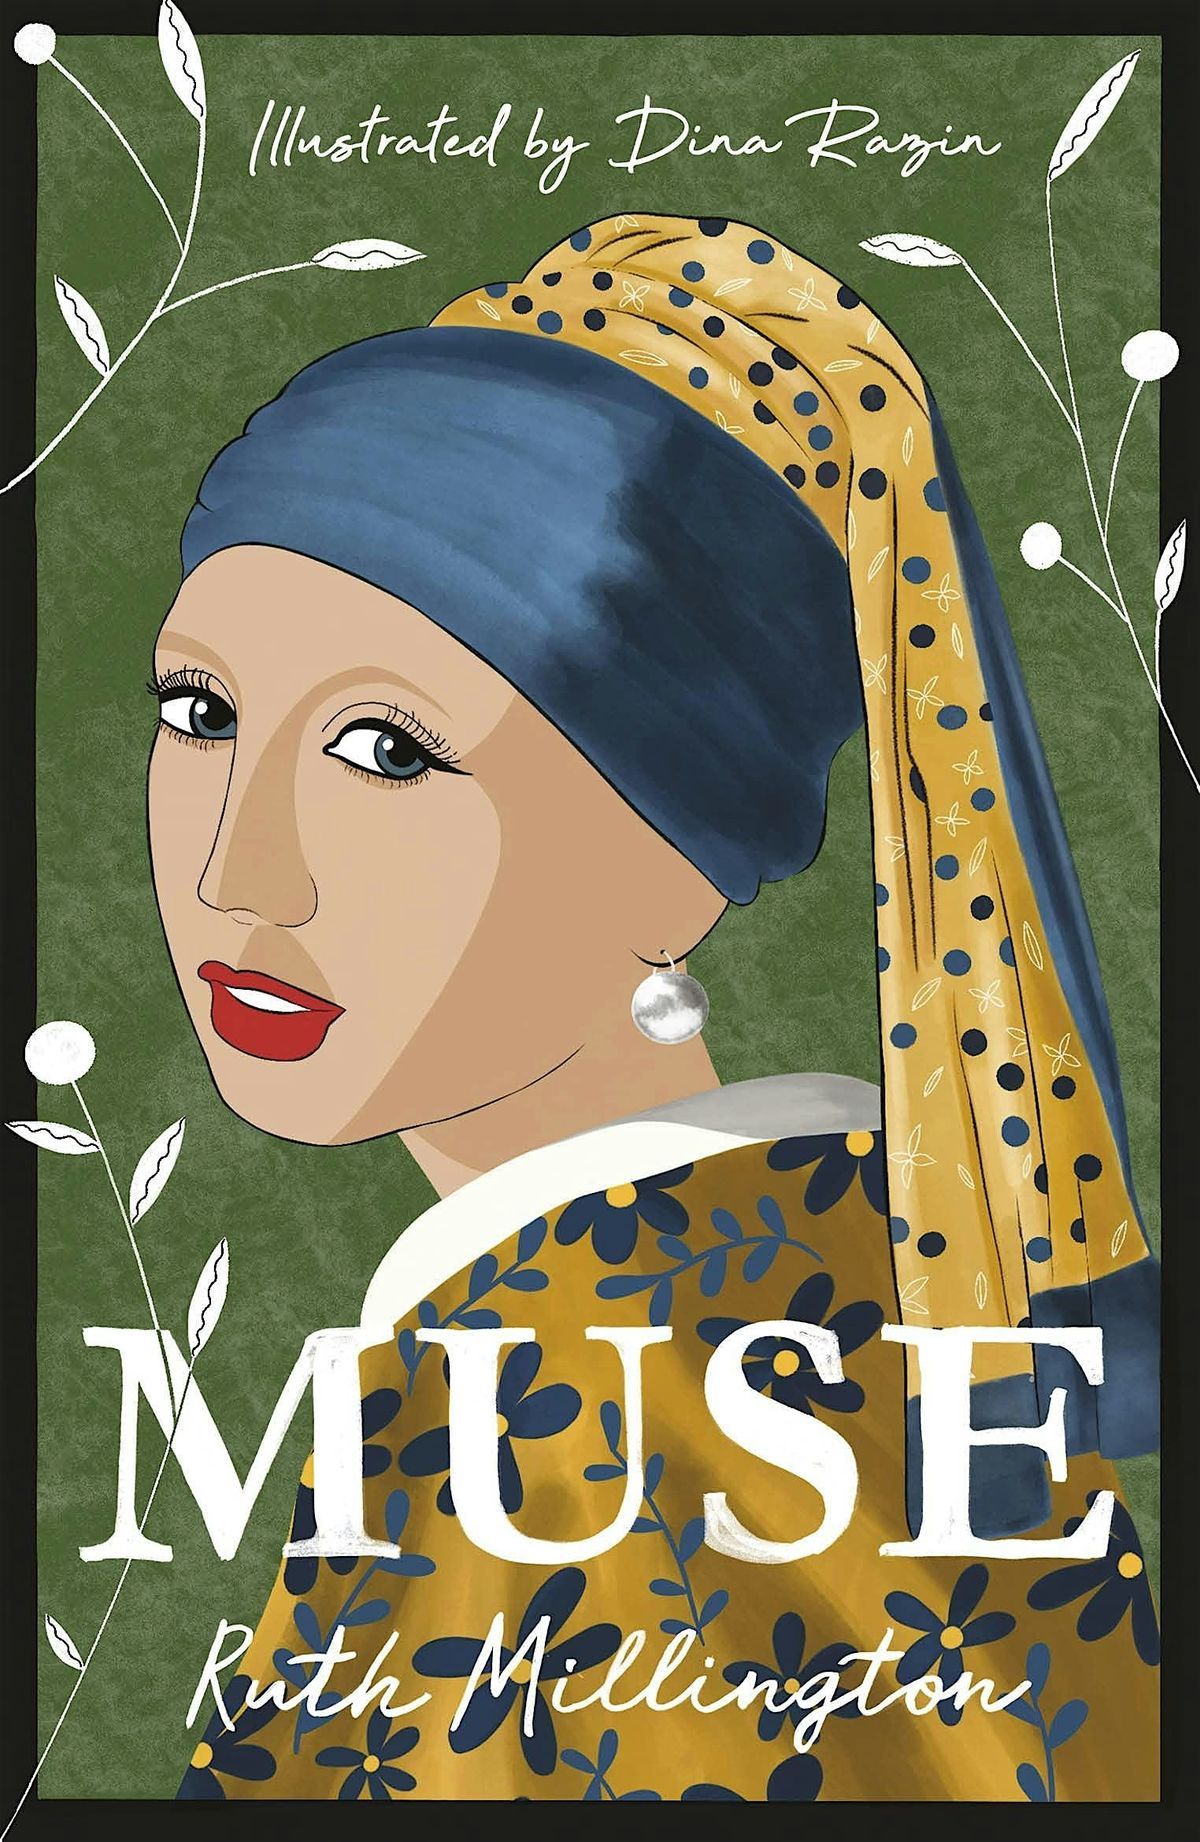 THE MUSE - A panel discussion